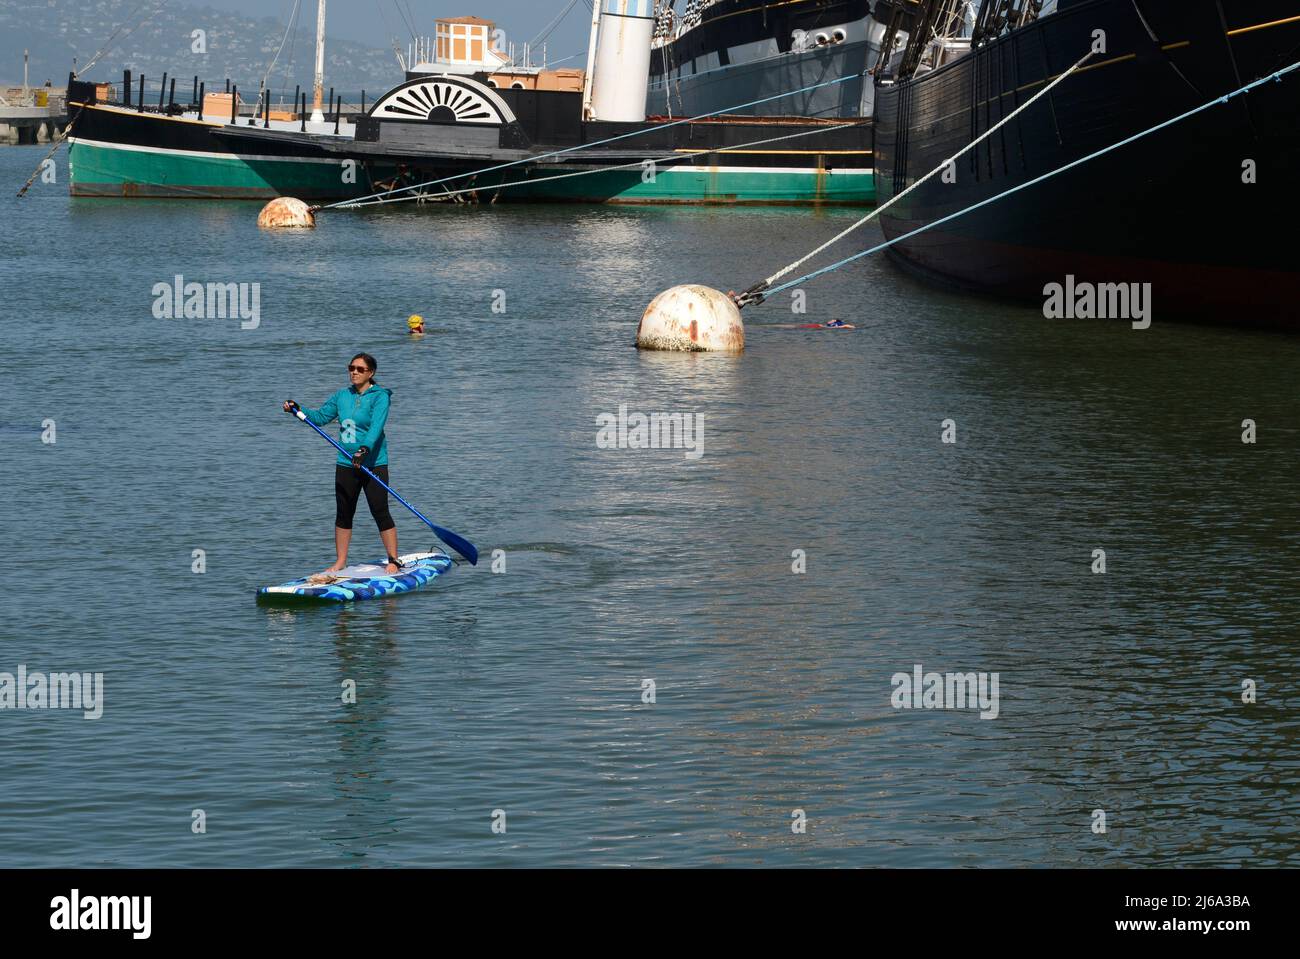 A woman enjoys riding a stand up paddle board in San Francisco Bay offshore from the Fisherman's Wharf district of San Francisco, California. Stock Photo